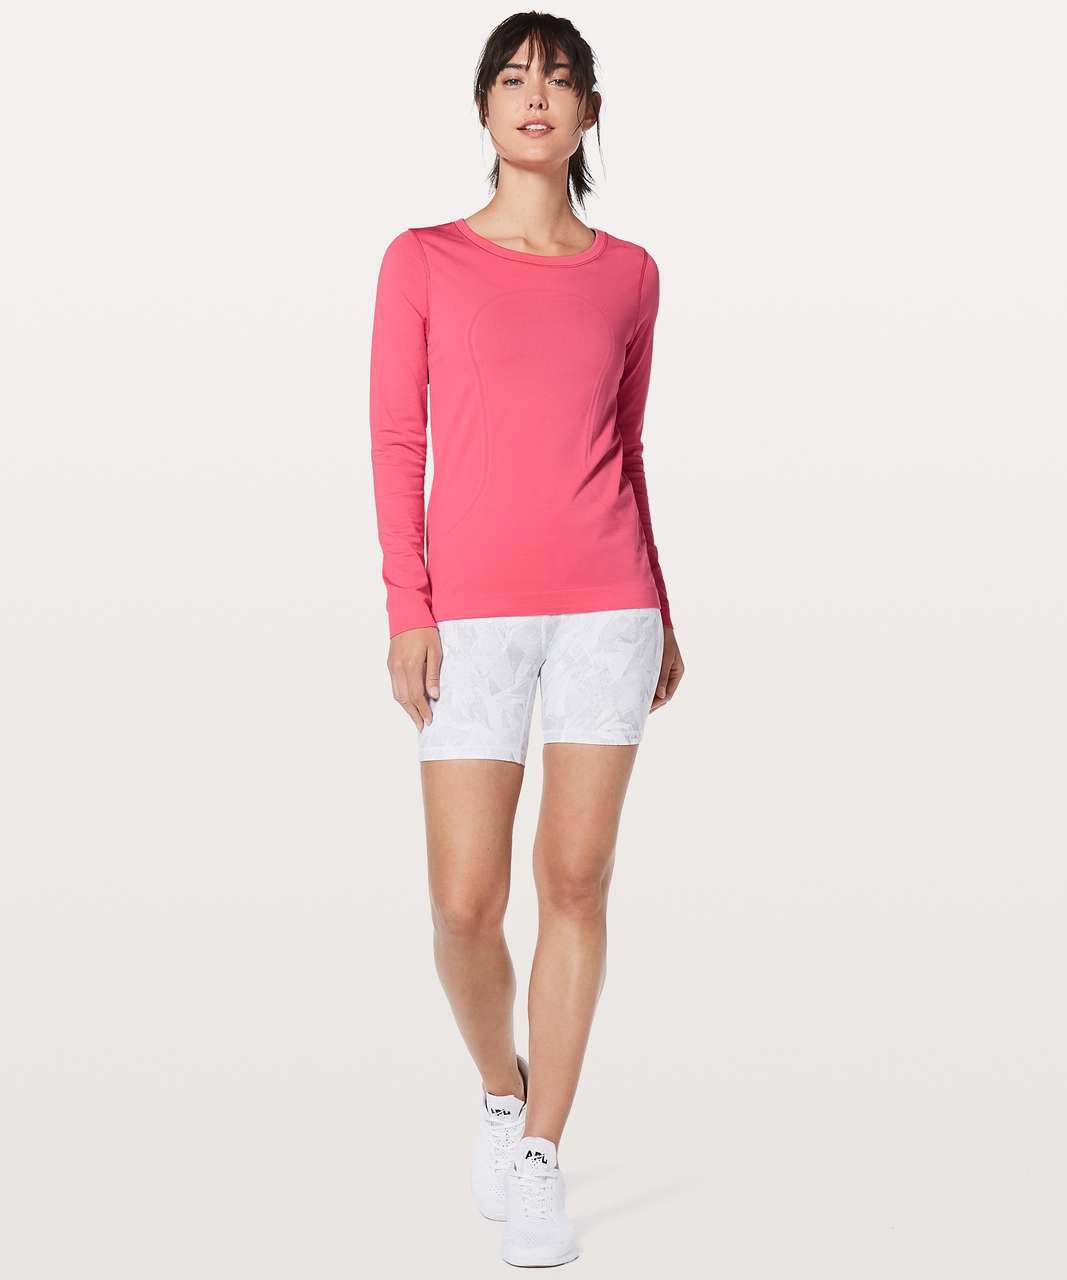 Lululemon Swiftly Tech Long Sleeve (Breeze) *Relaxed Fit - Glossy / Glossy